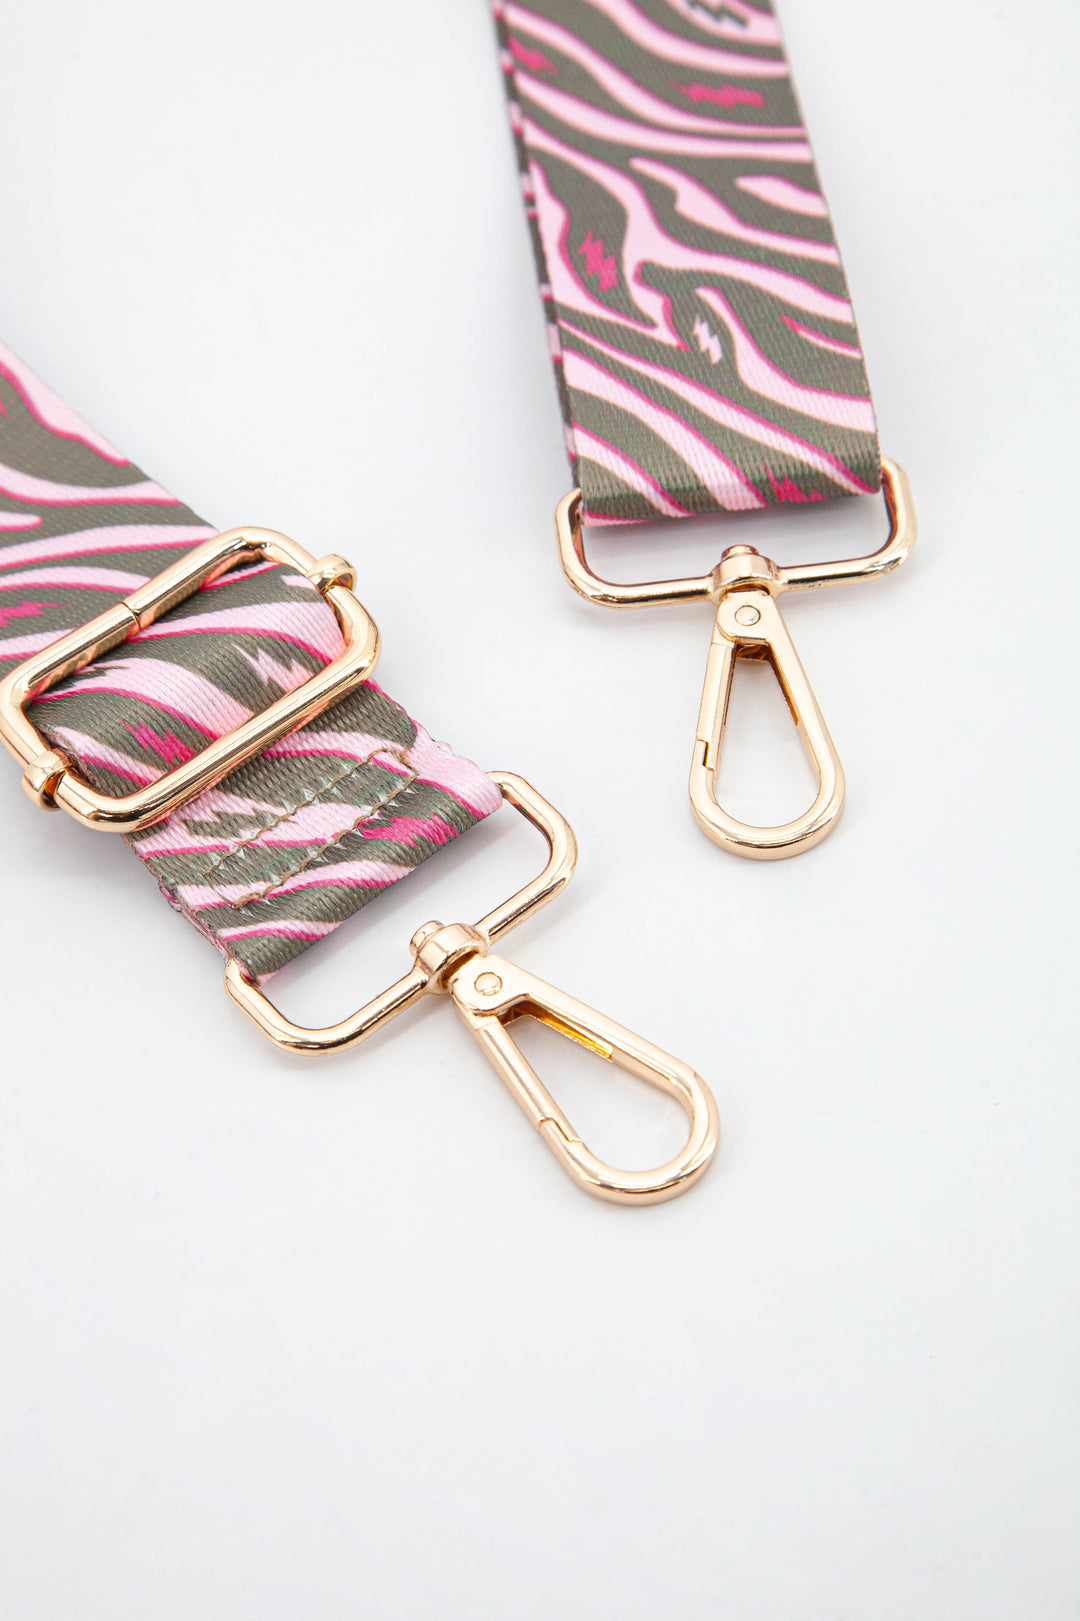 close up of the gold hardware, clip on snap hooks which can be used to attach the bag strap to any bag